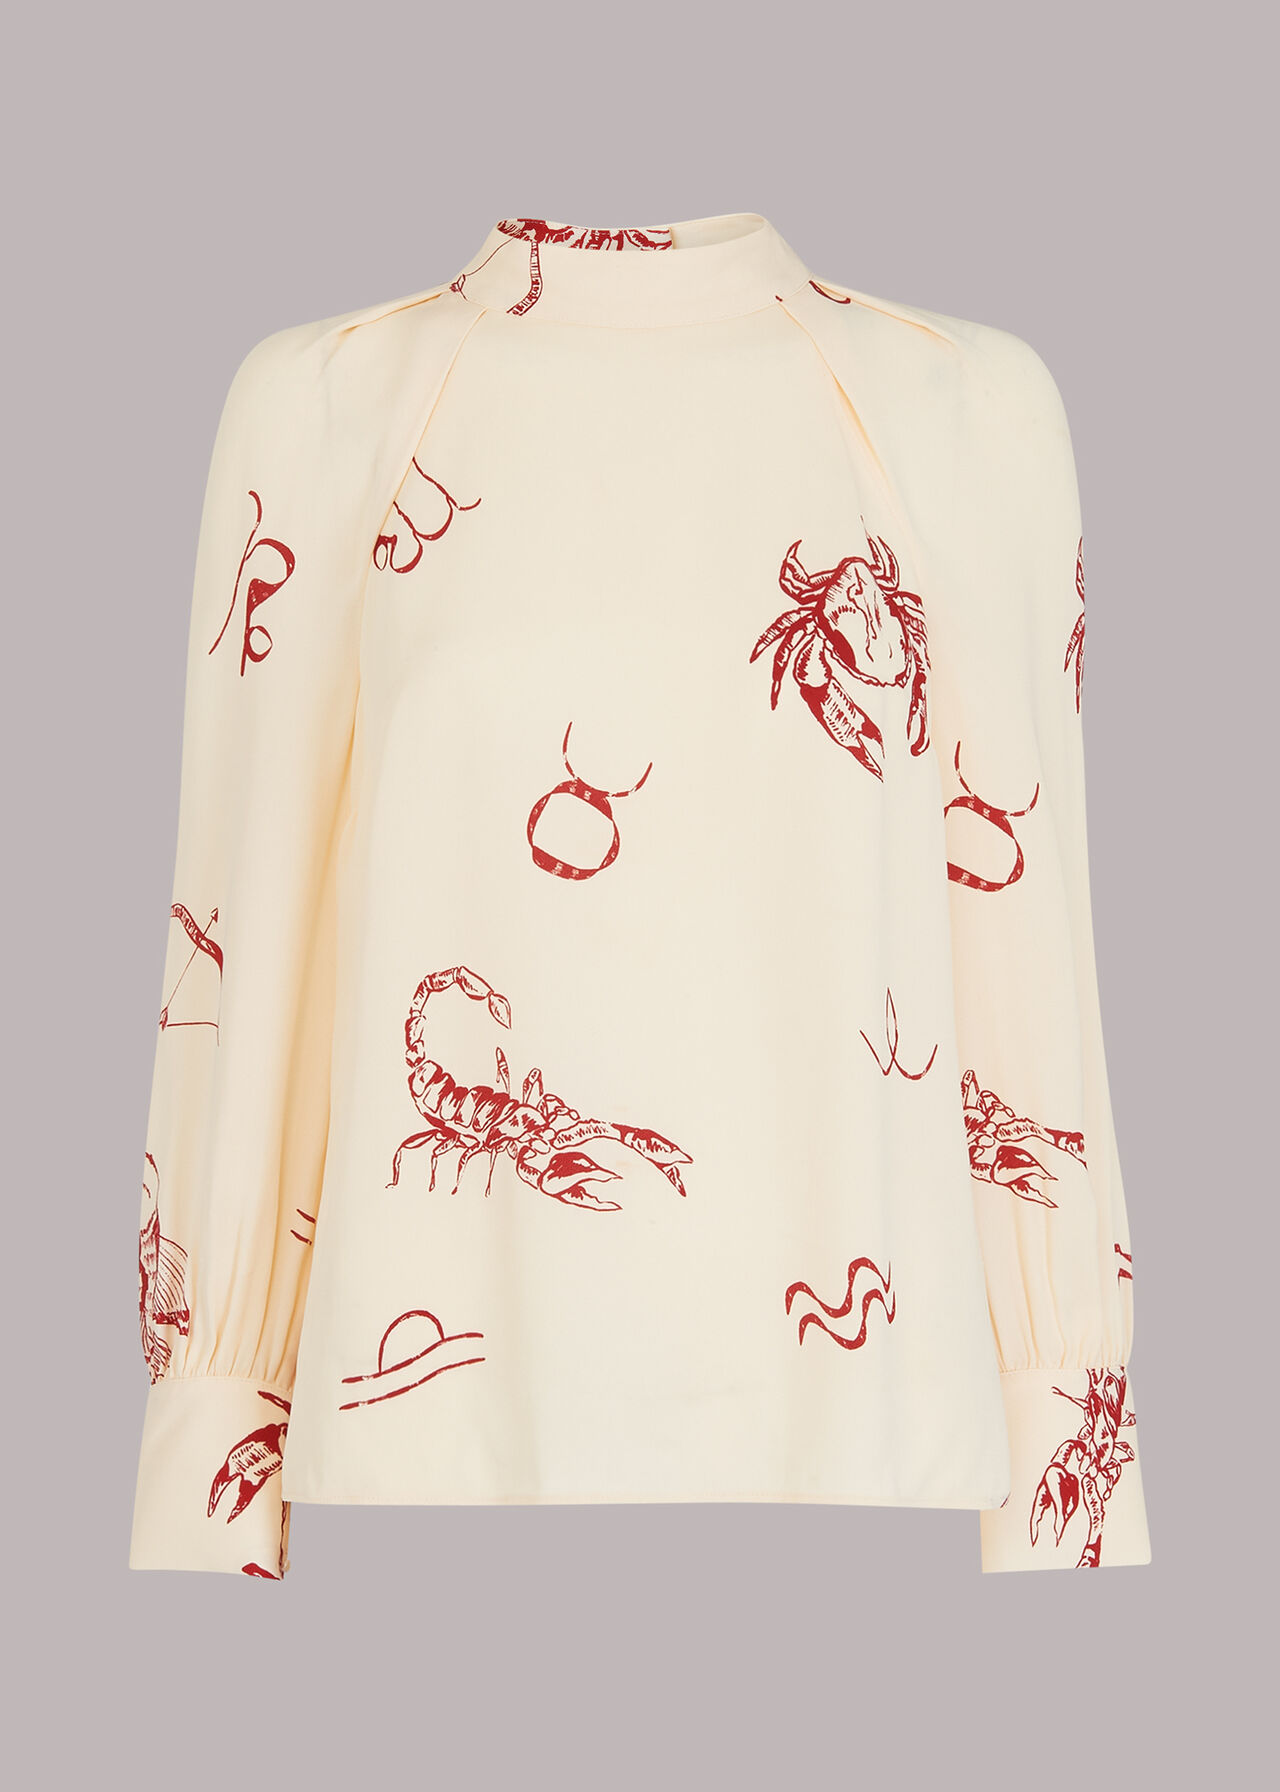 Horoscope Print Melodie Top